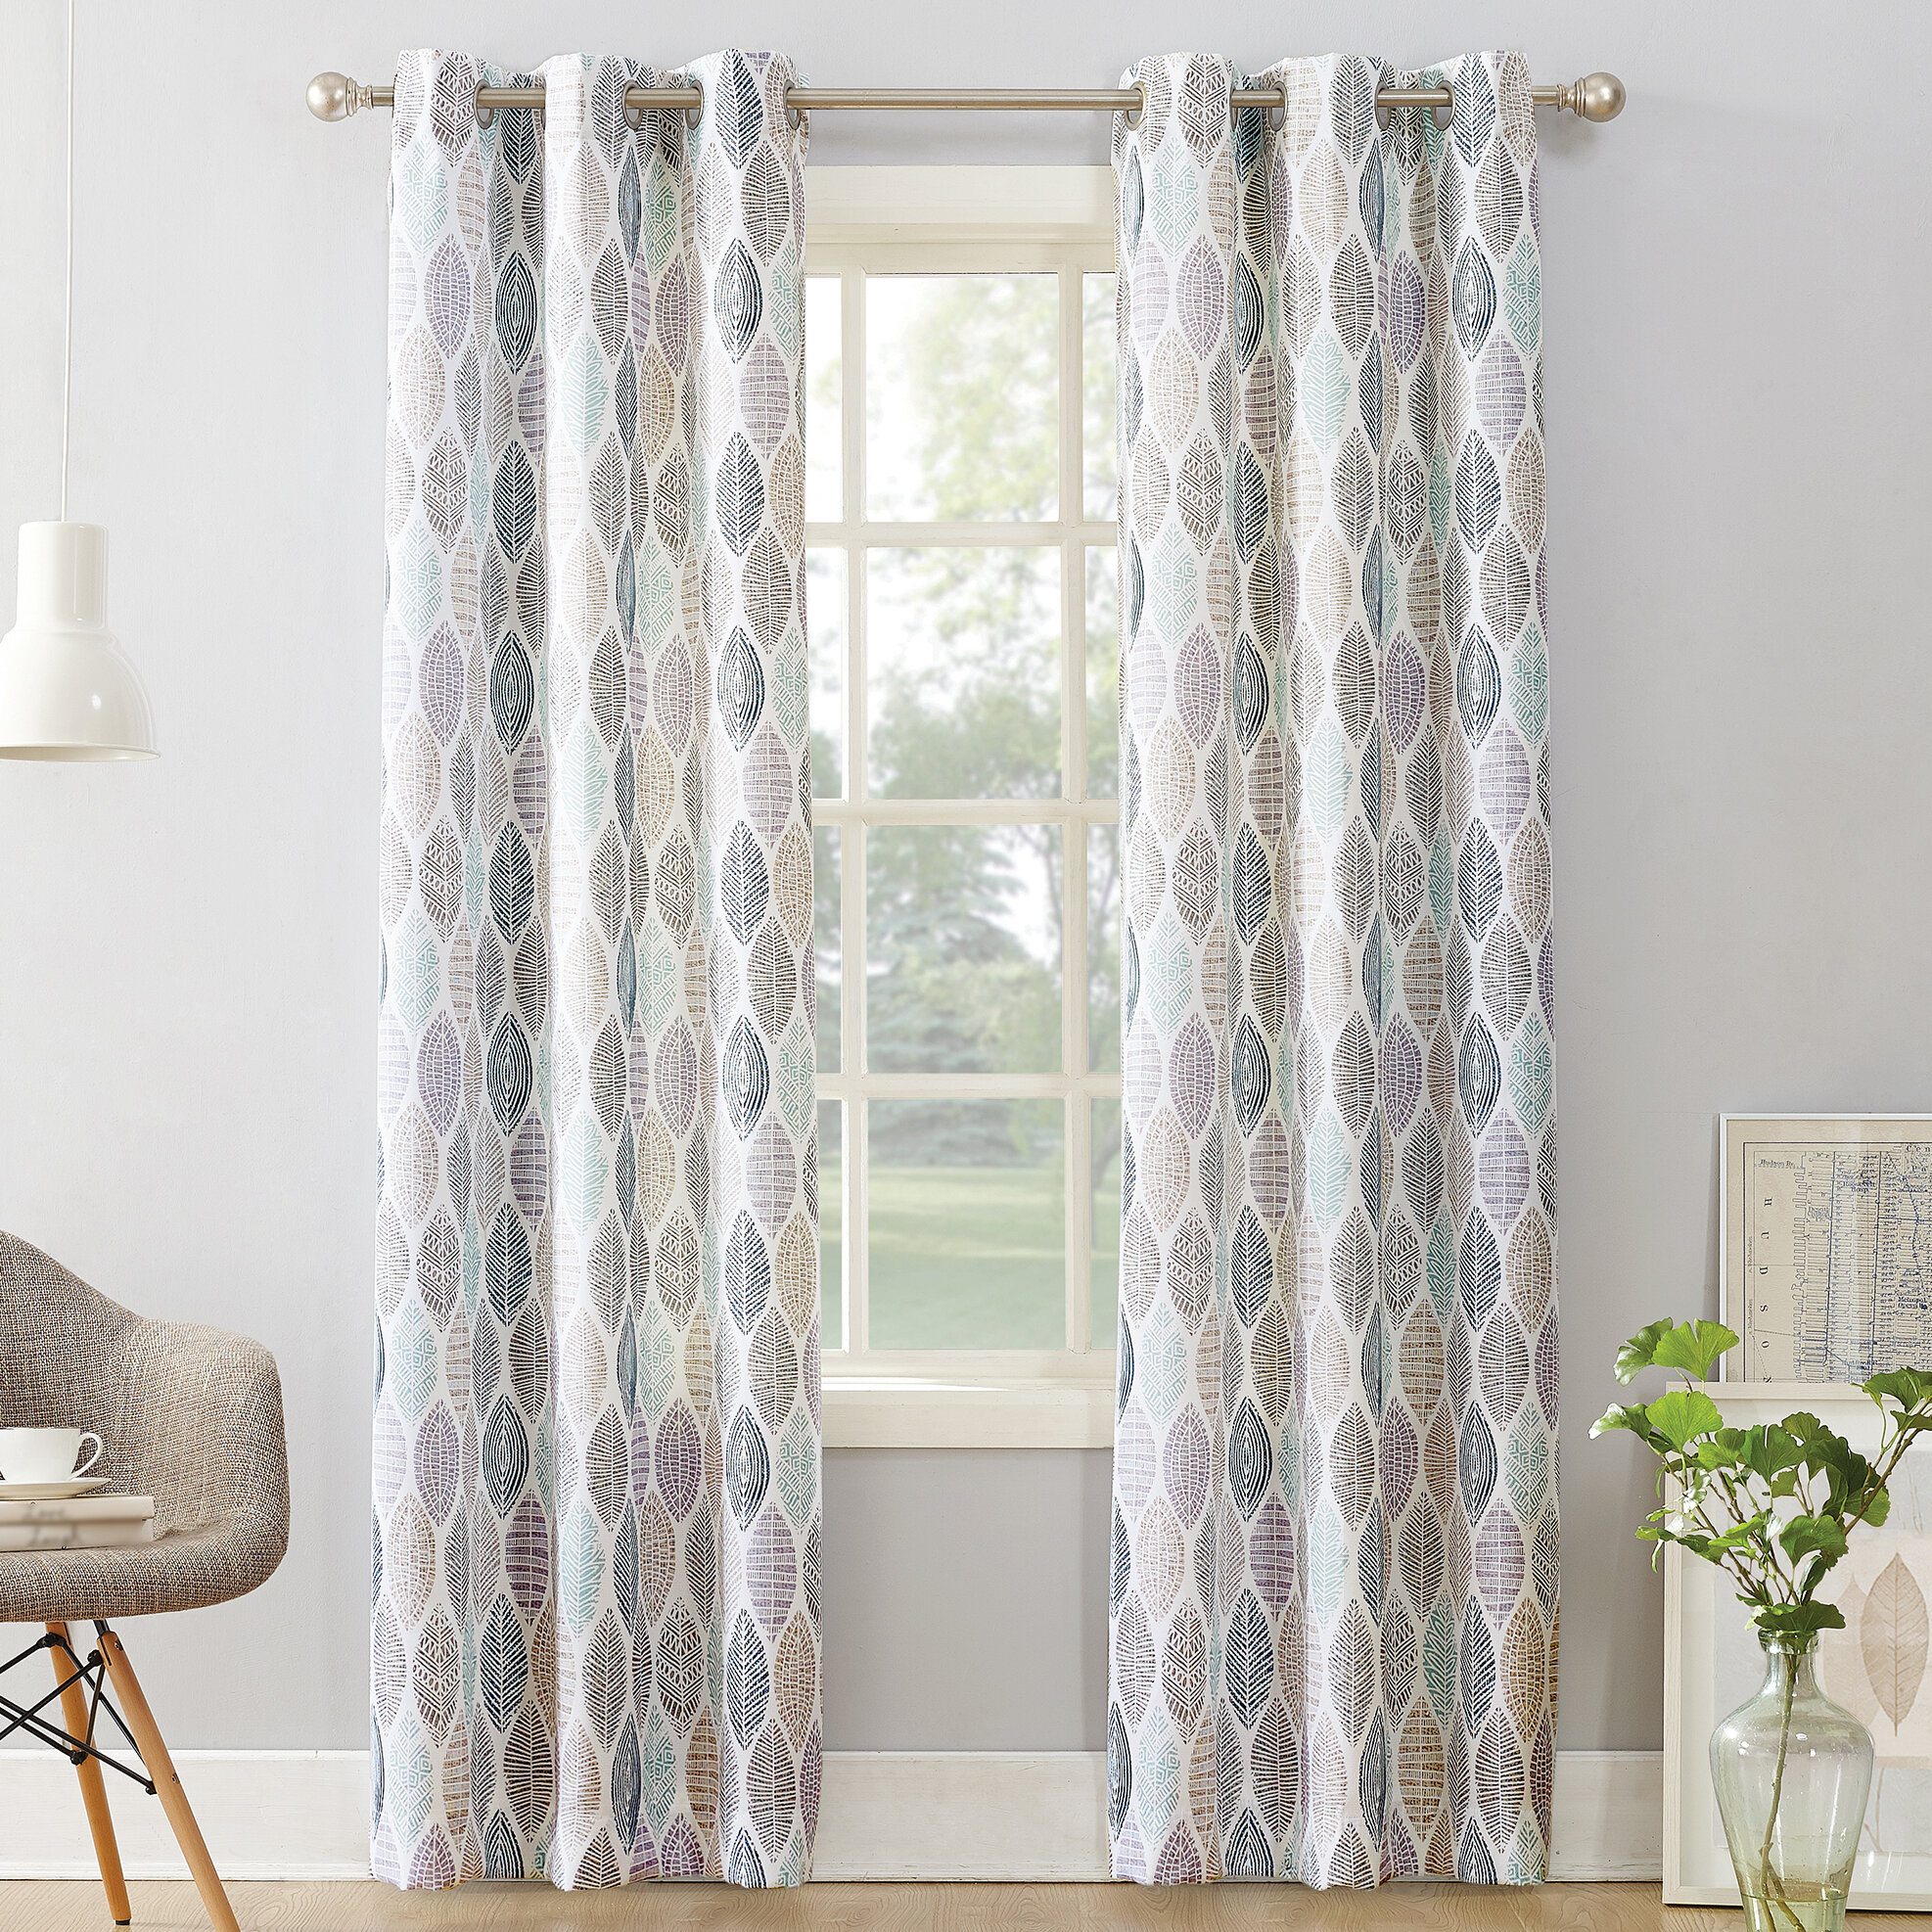 Basic Home Grommet Top Single Sheer Window Curtains Assorted Colors & Sizes